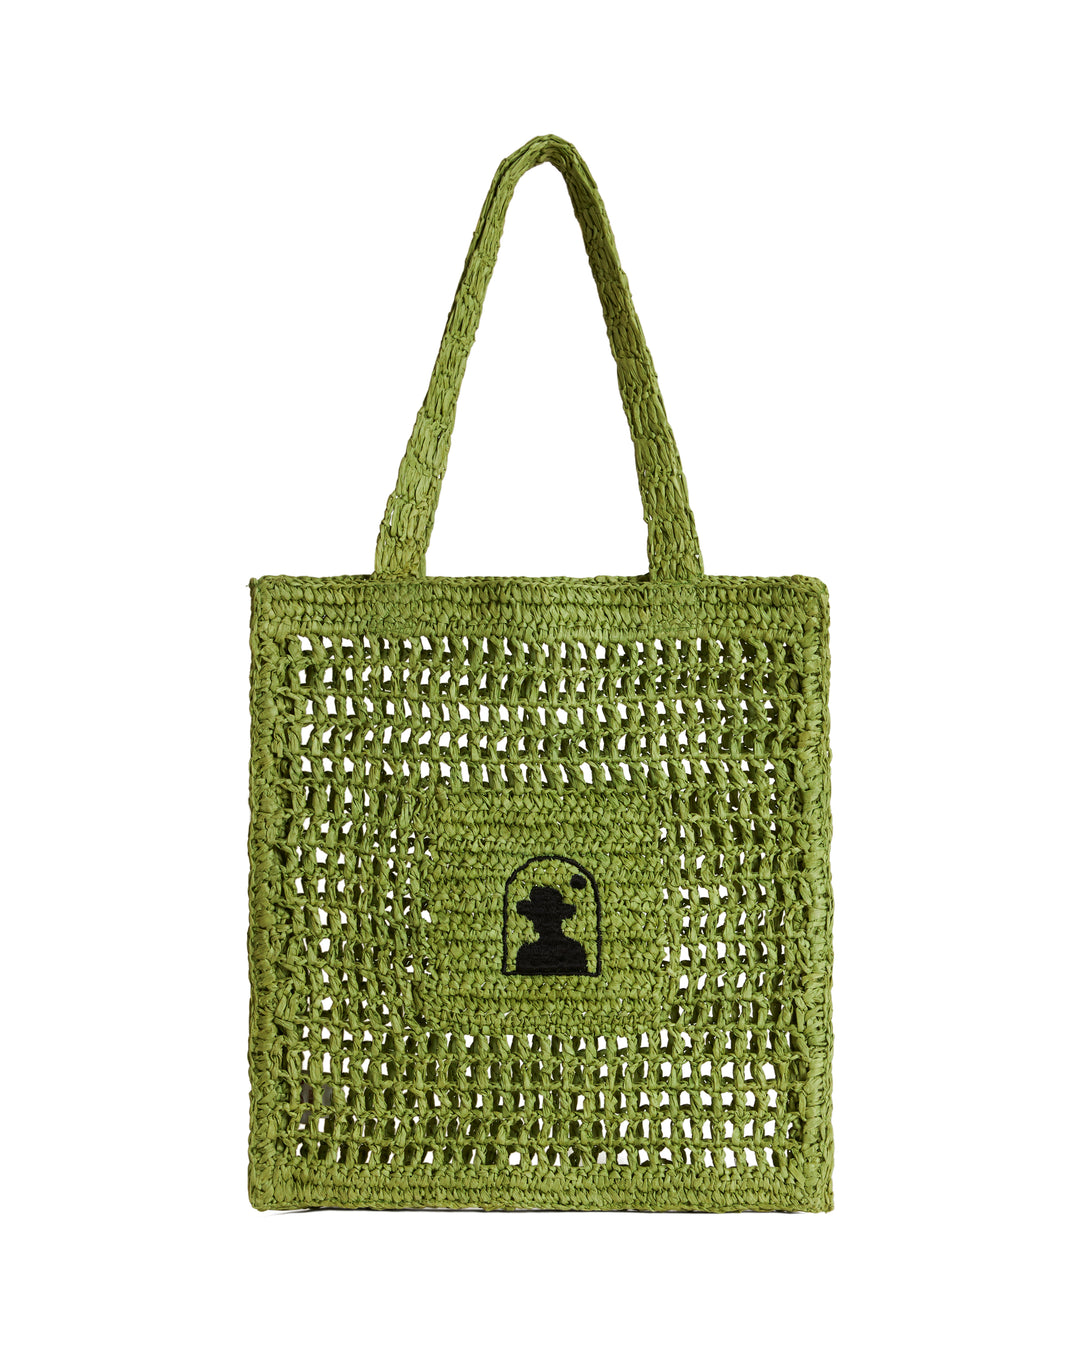 The Amabile Raffia Bag in Kaffir by Dandy Del Mar, with a black padlock design in the center, isolated on a white background.